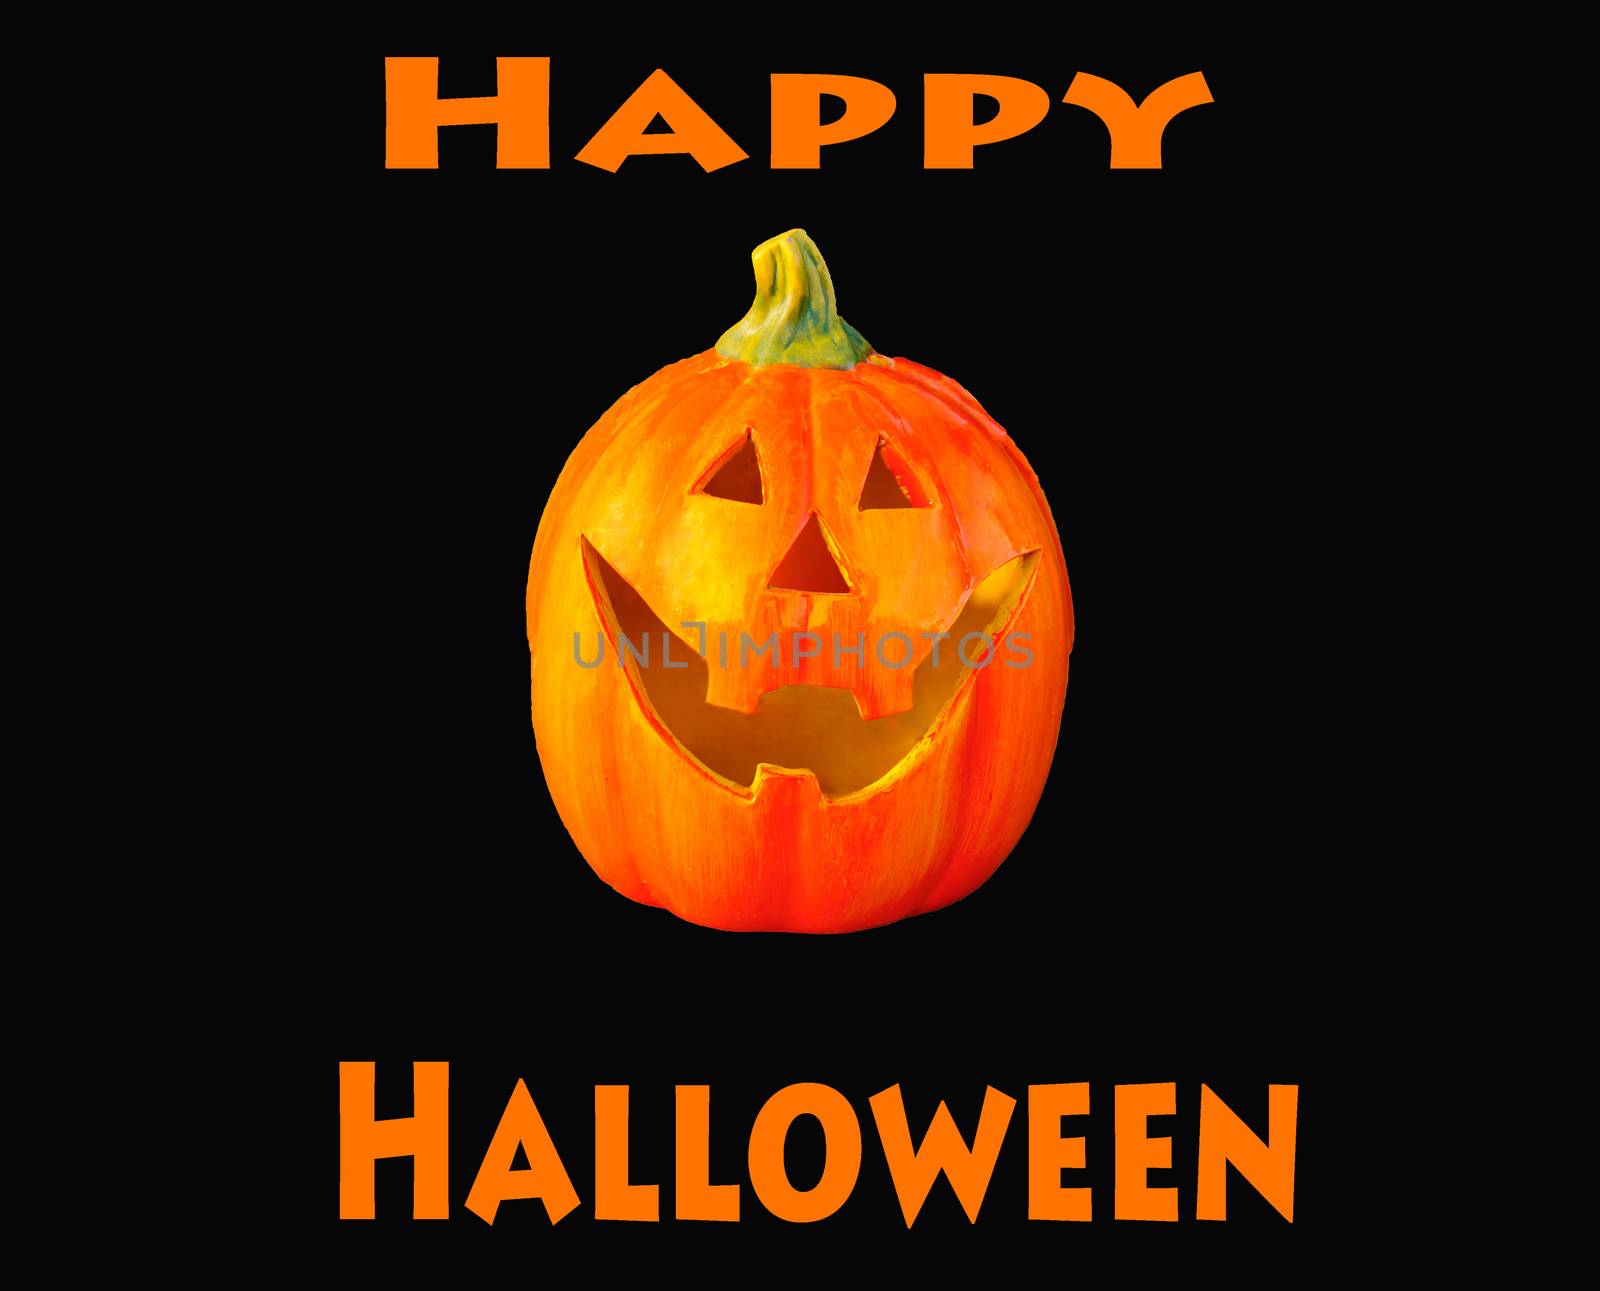 A happy smiling orange pumpkin face with the text: Happy Halloween. Black background colour.